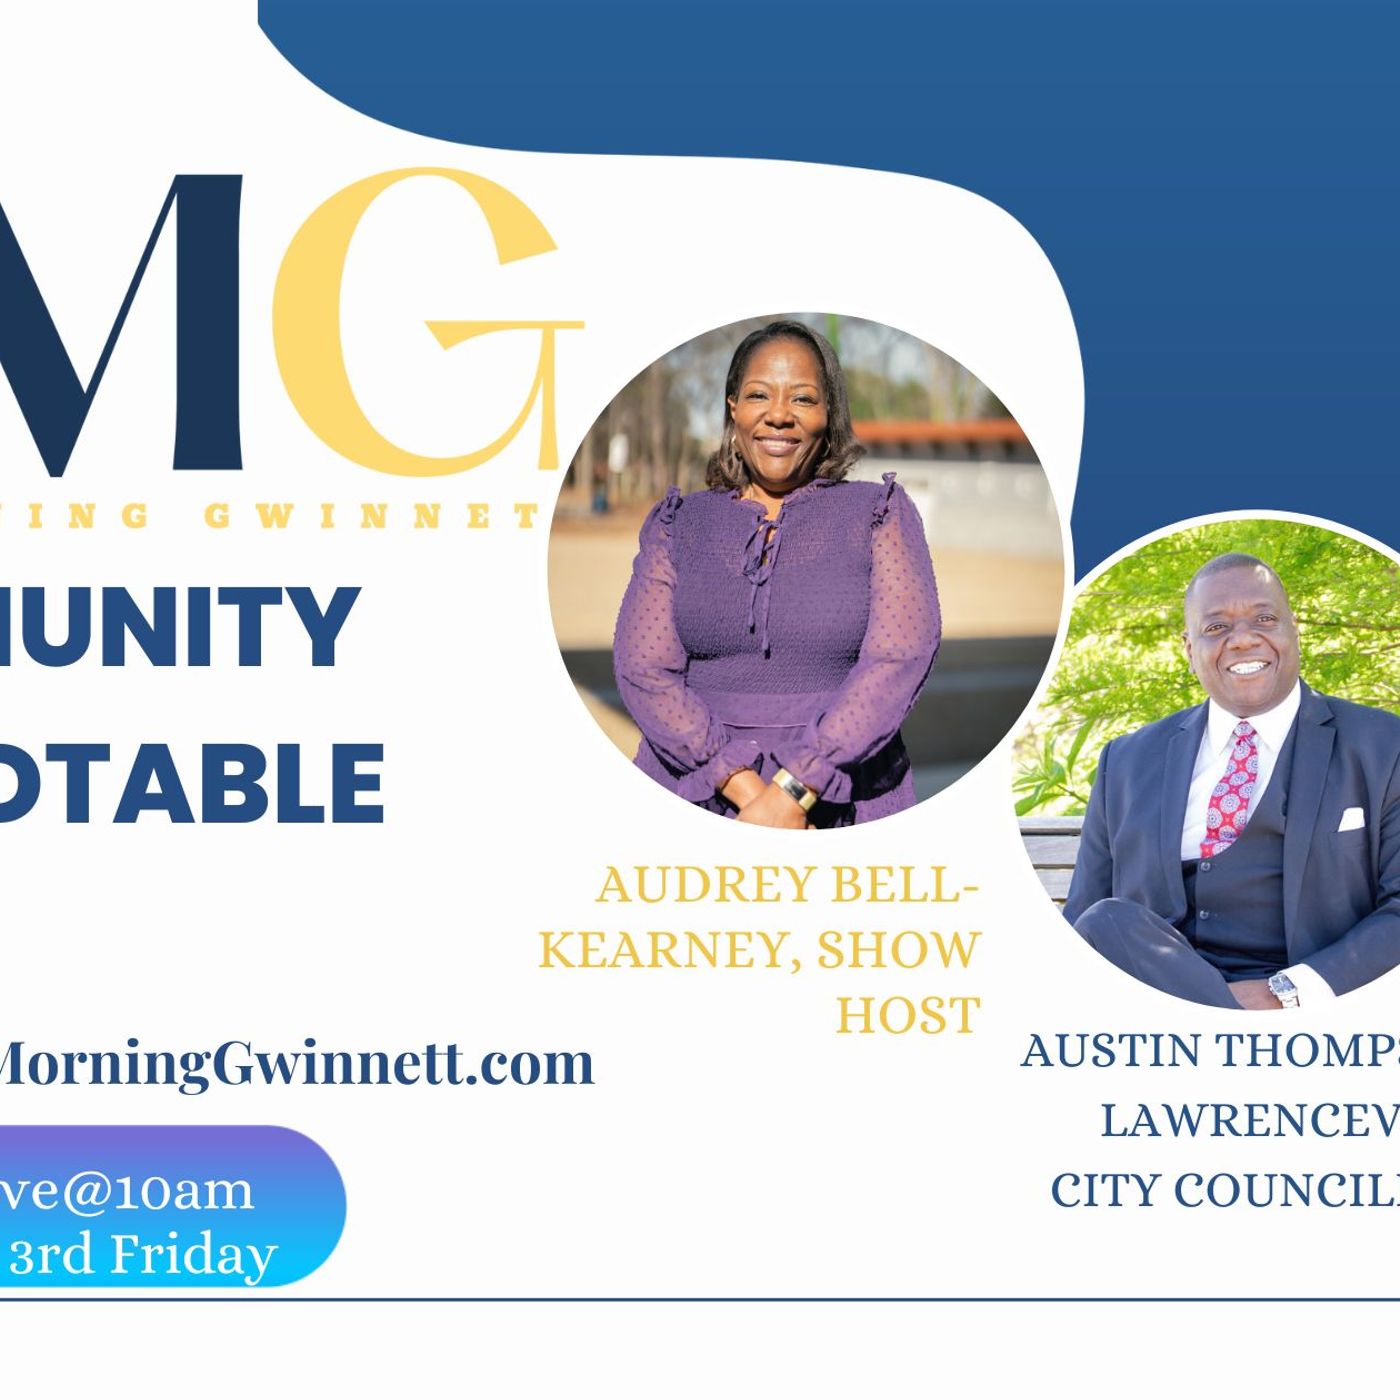 Councilman Austin Thompson Comes To The Community Roundtable